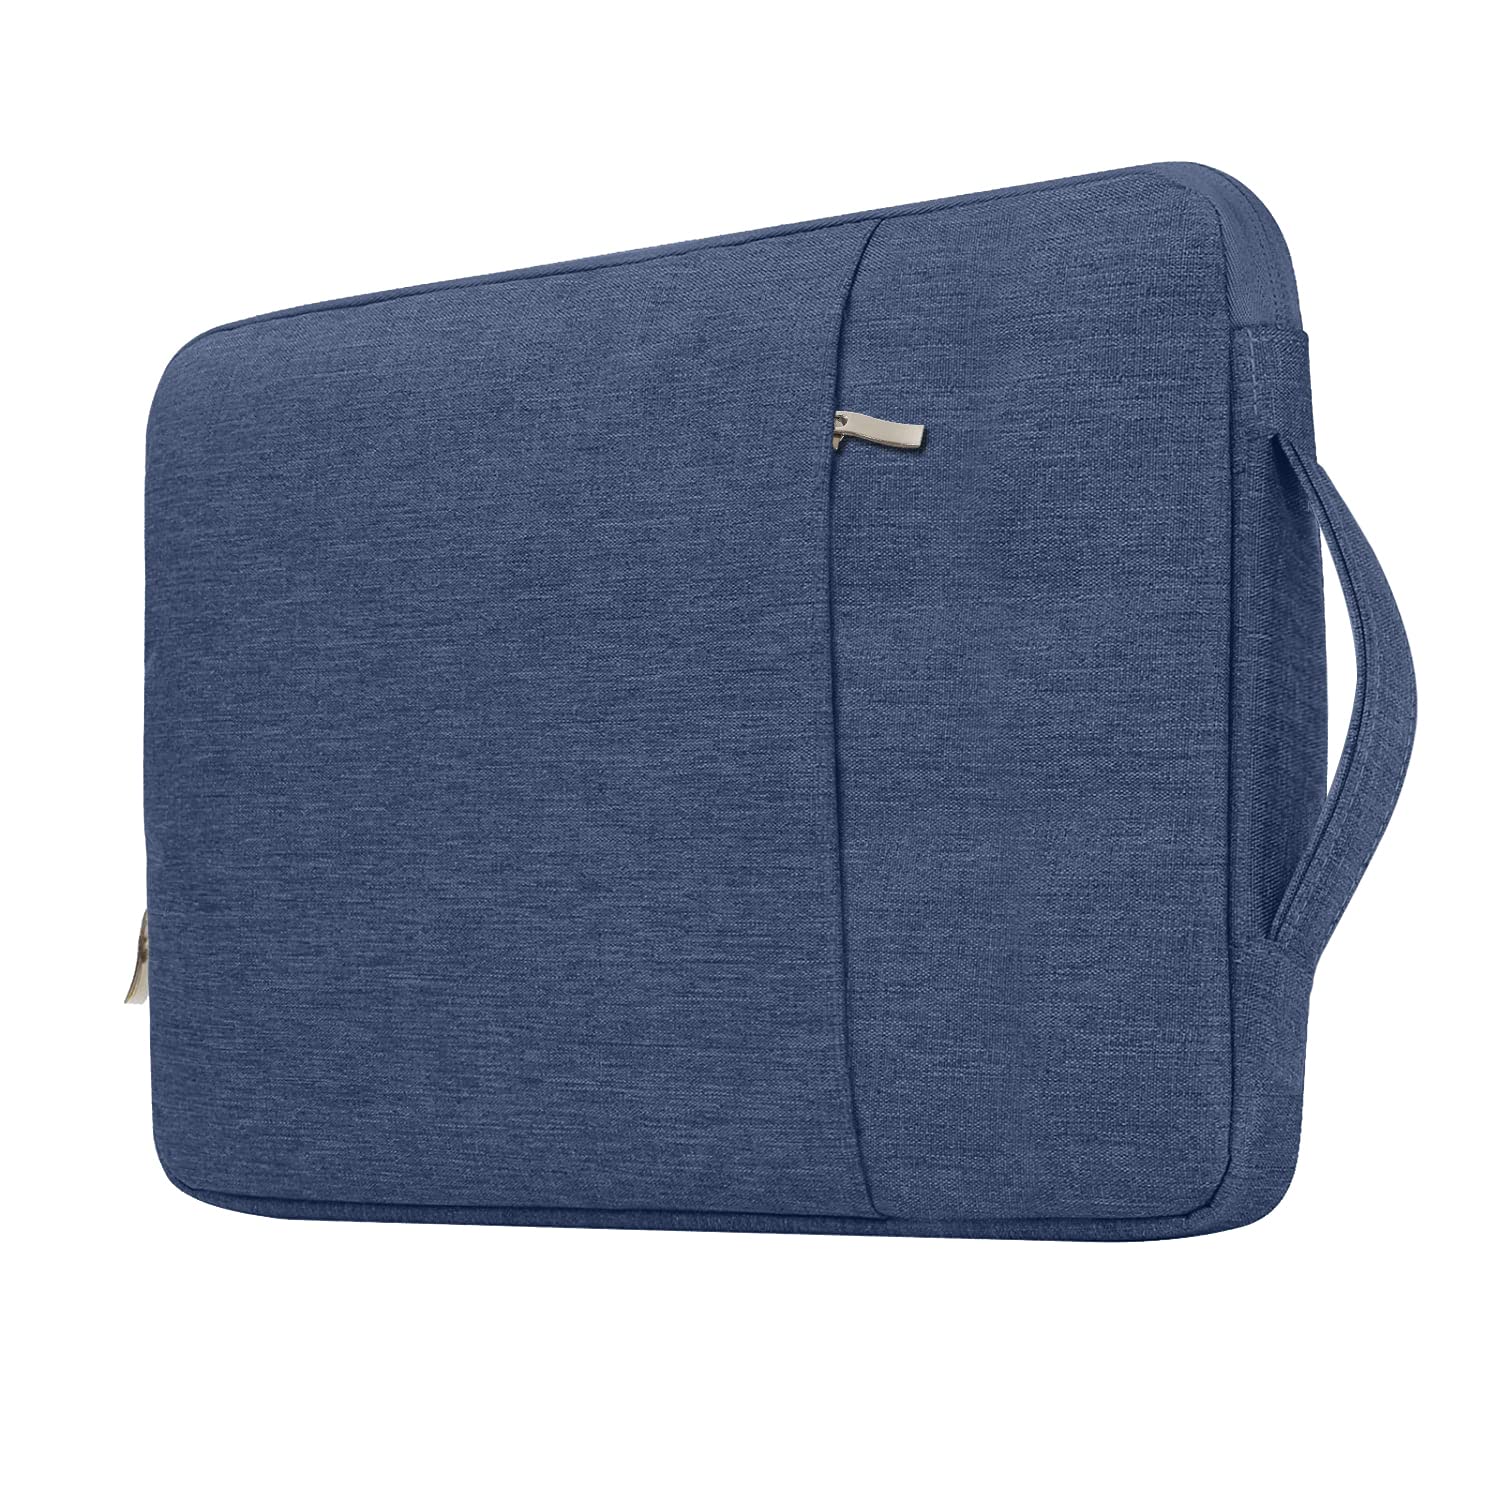 Blue - Robustrion Premium Denim Series Laptop Carrying Case Sleeve Bag for 14 to 15.6 inch Laptops